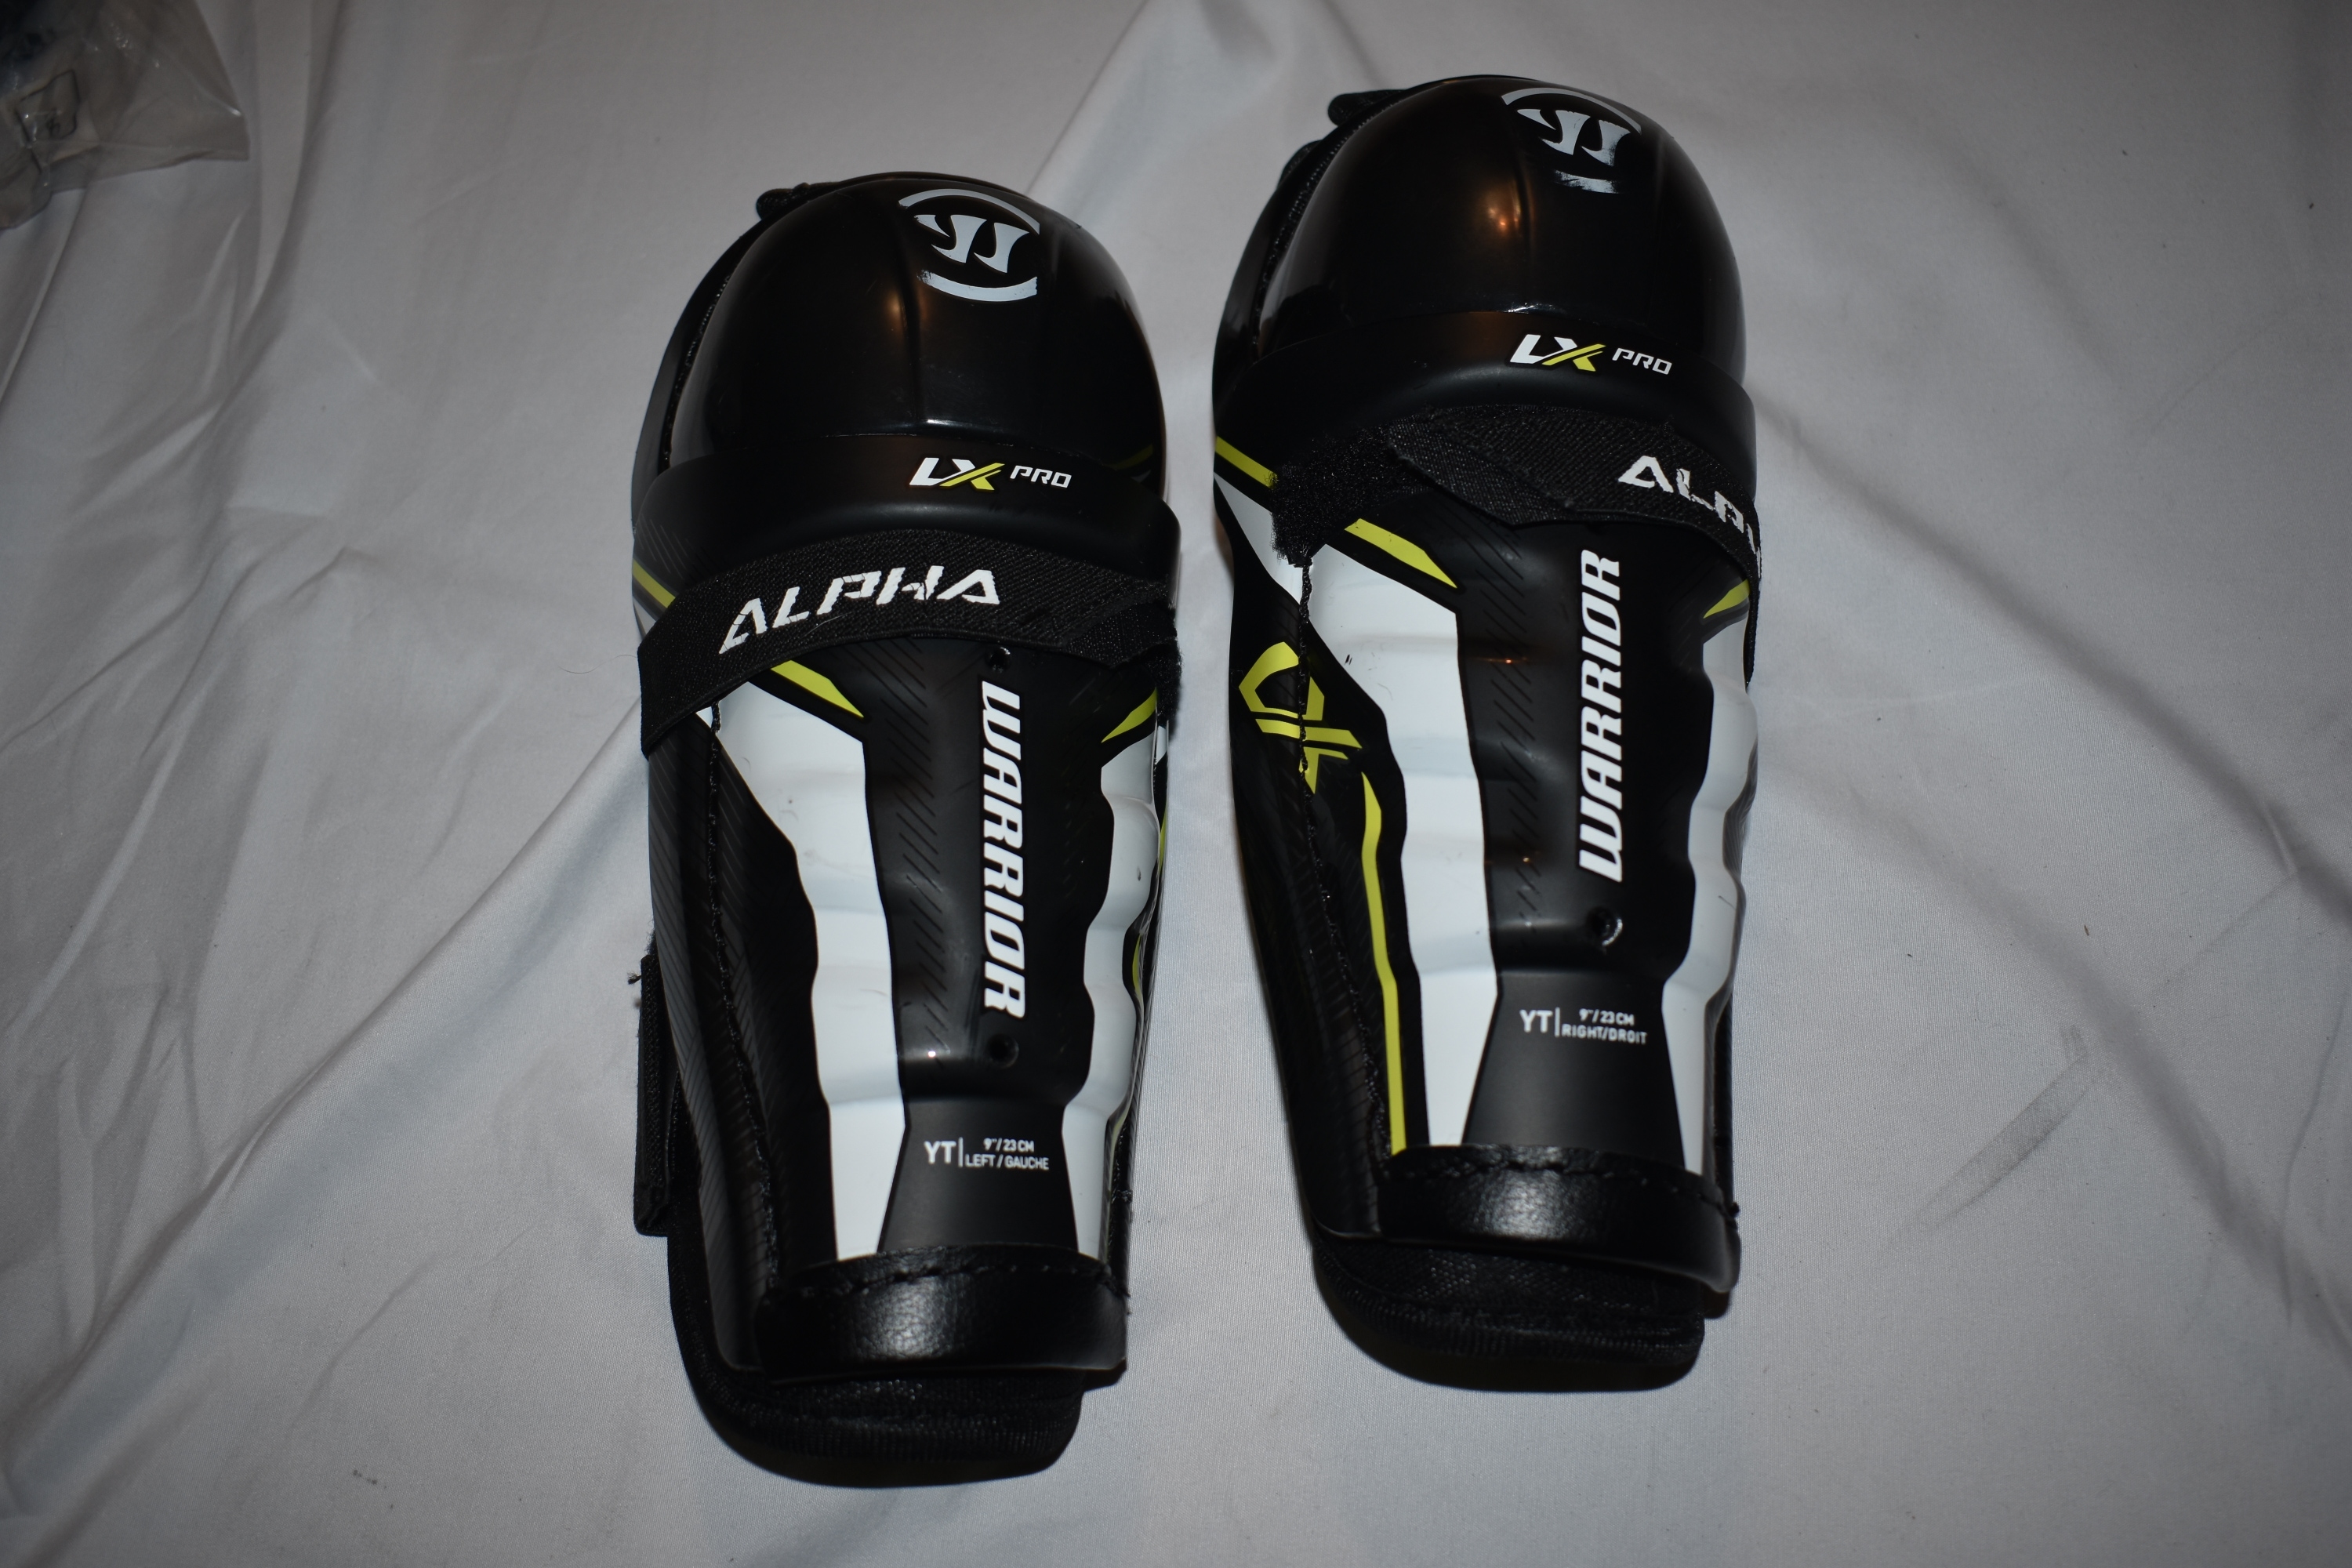 Warrior Alpha LX Pro Hockey Shin Pads, 9 Inches - Great Condition!